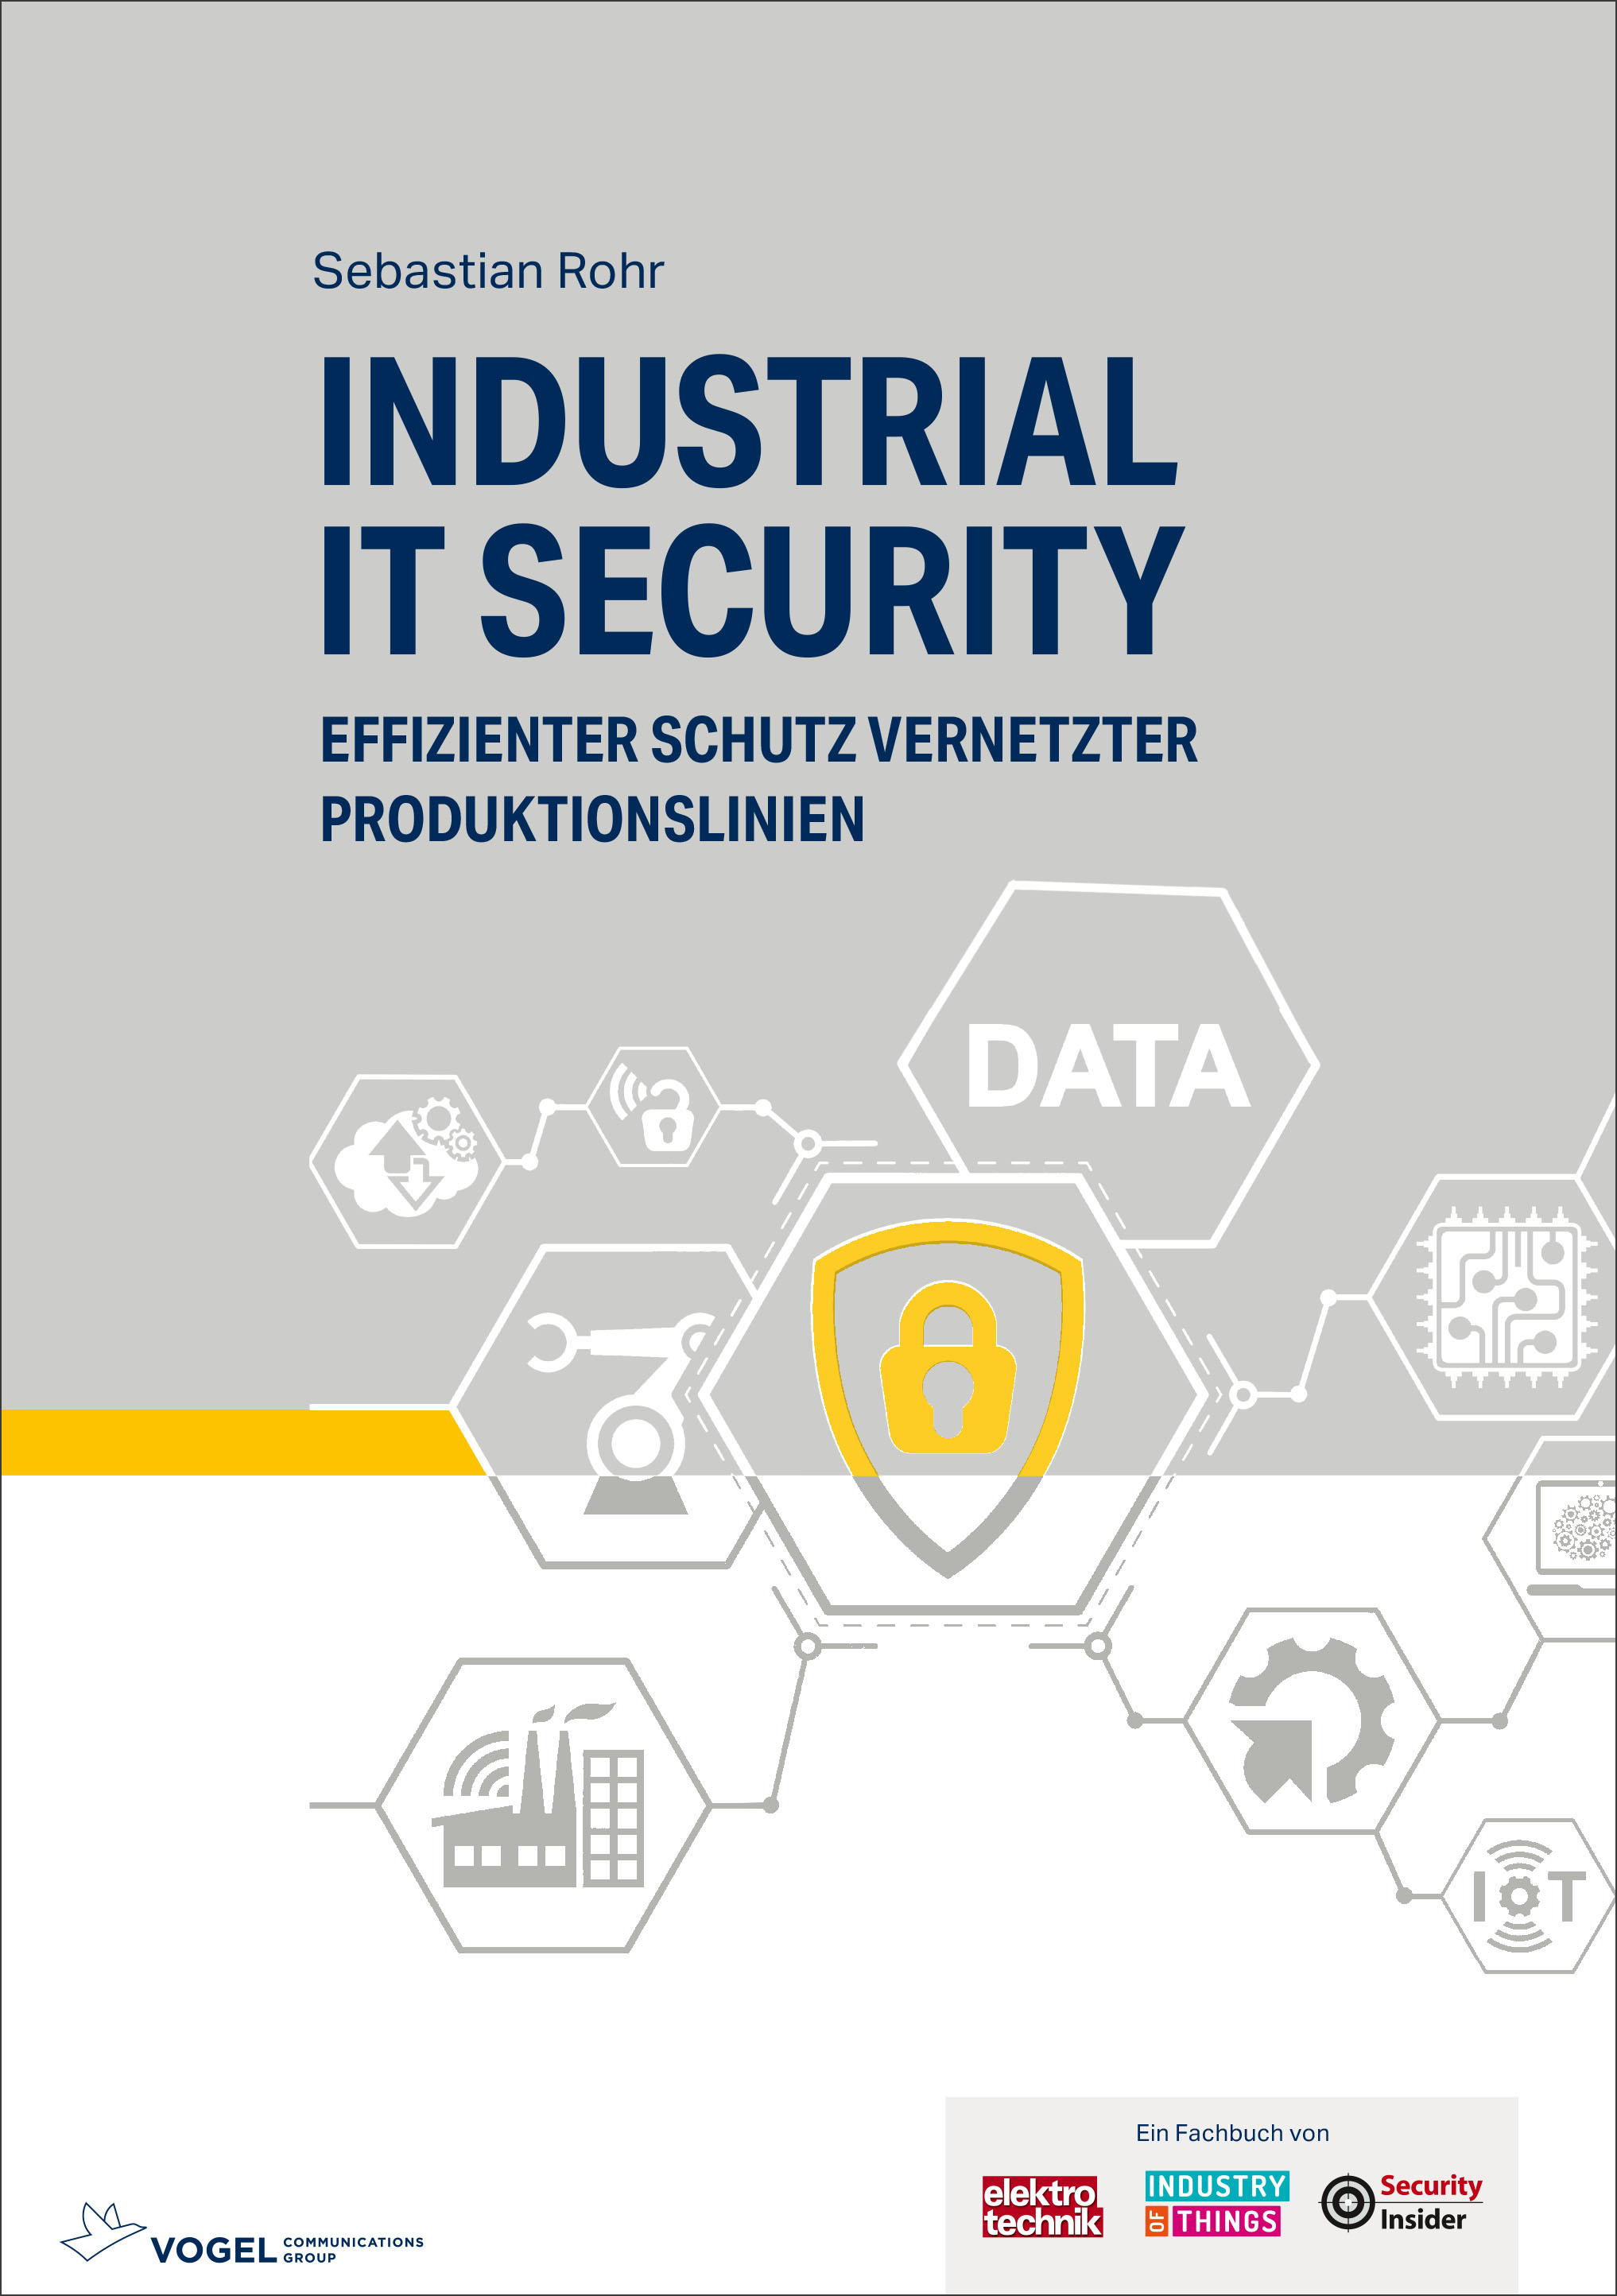 Industrial IT Security